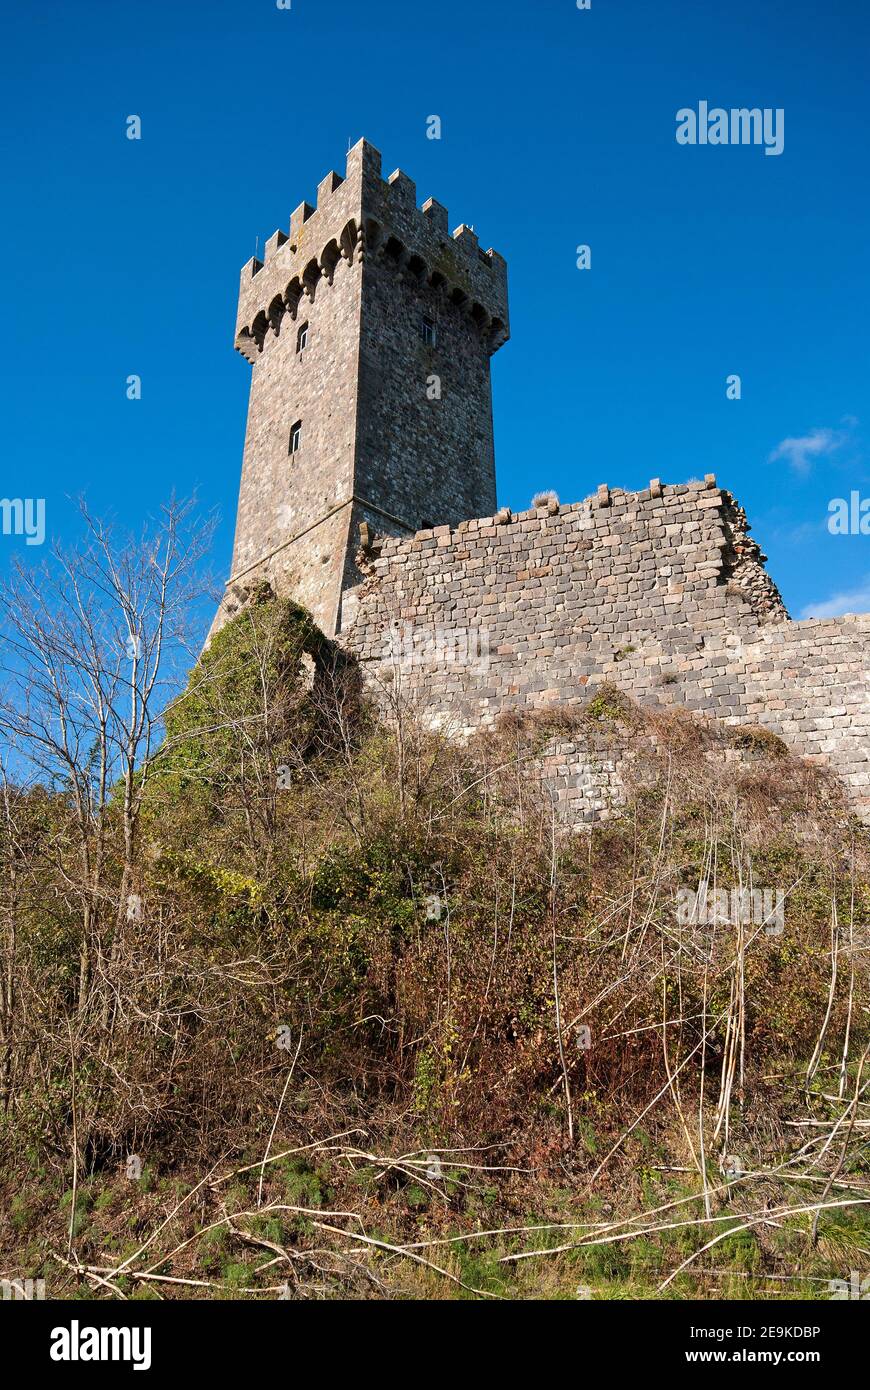 Crenellated Tower High Resolution Stock Photography And Images Alamy